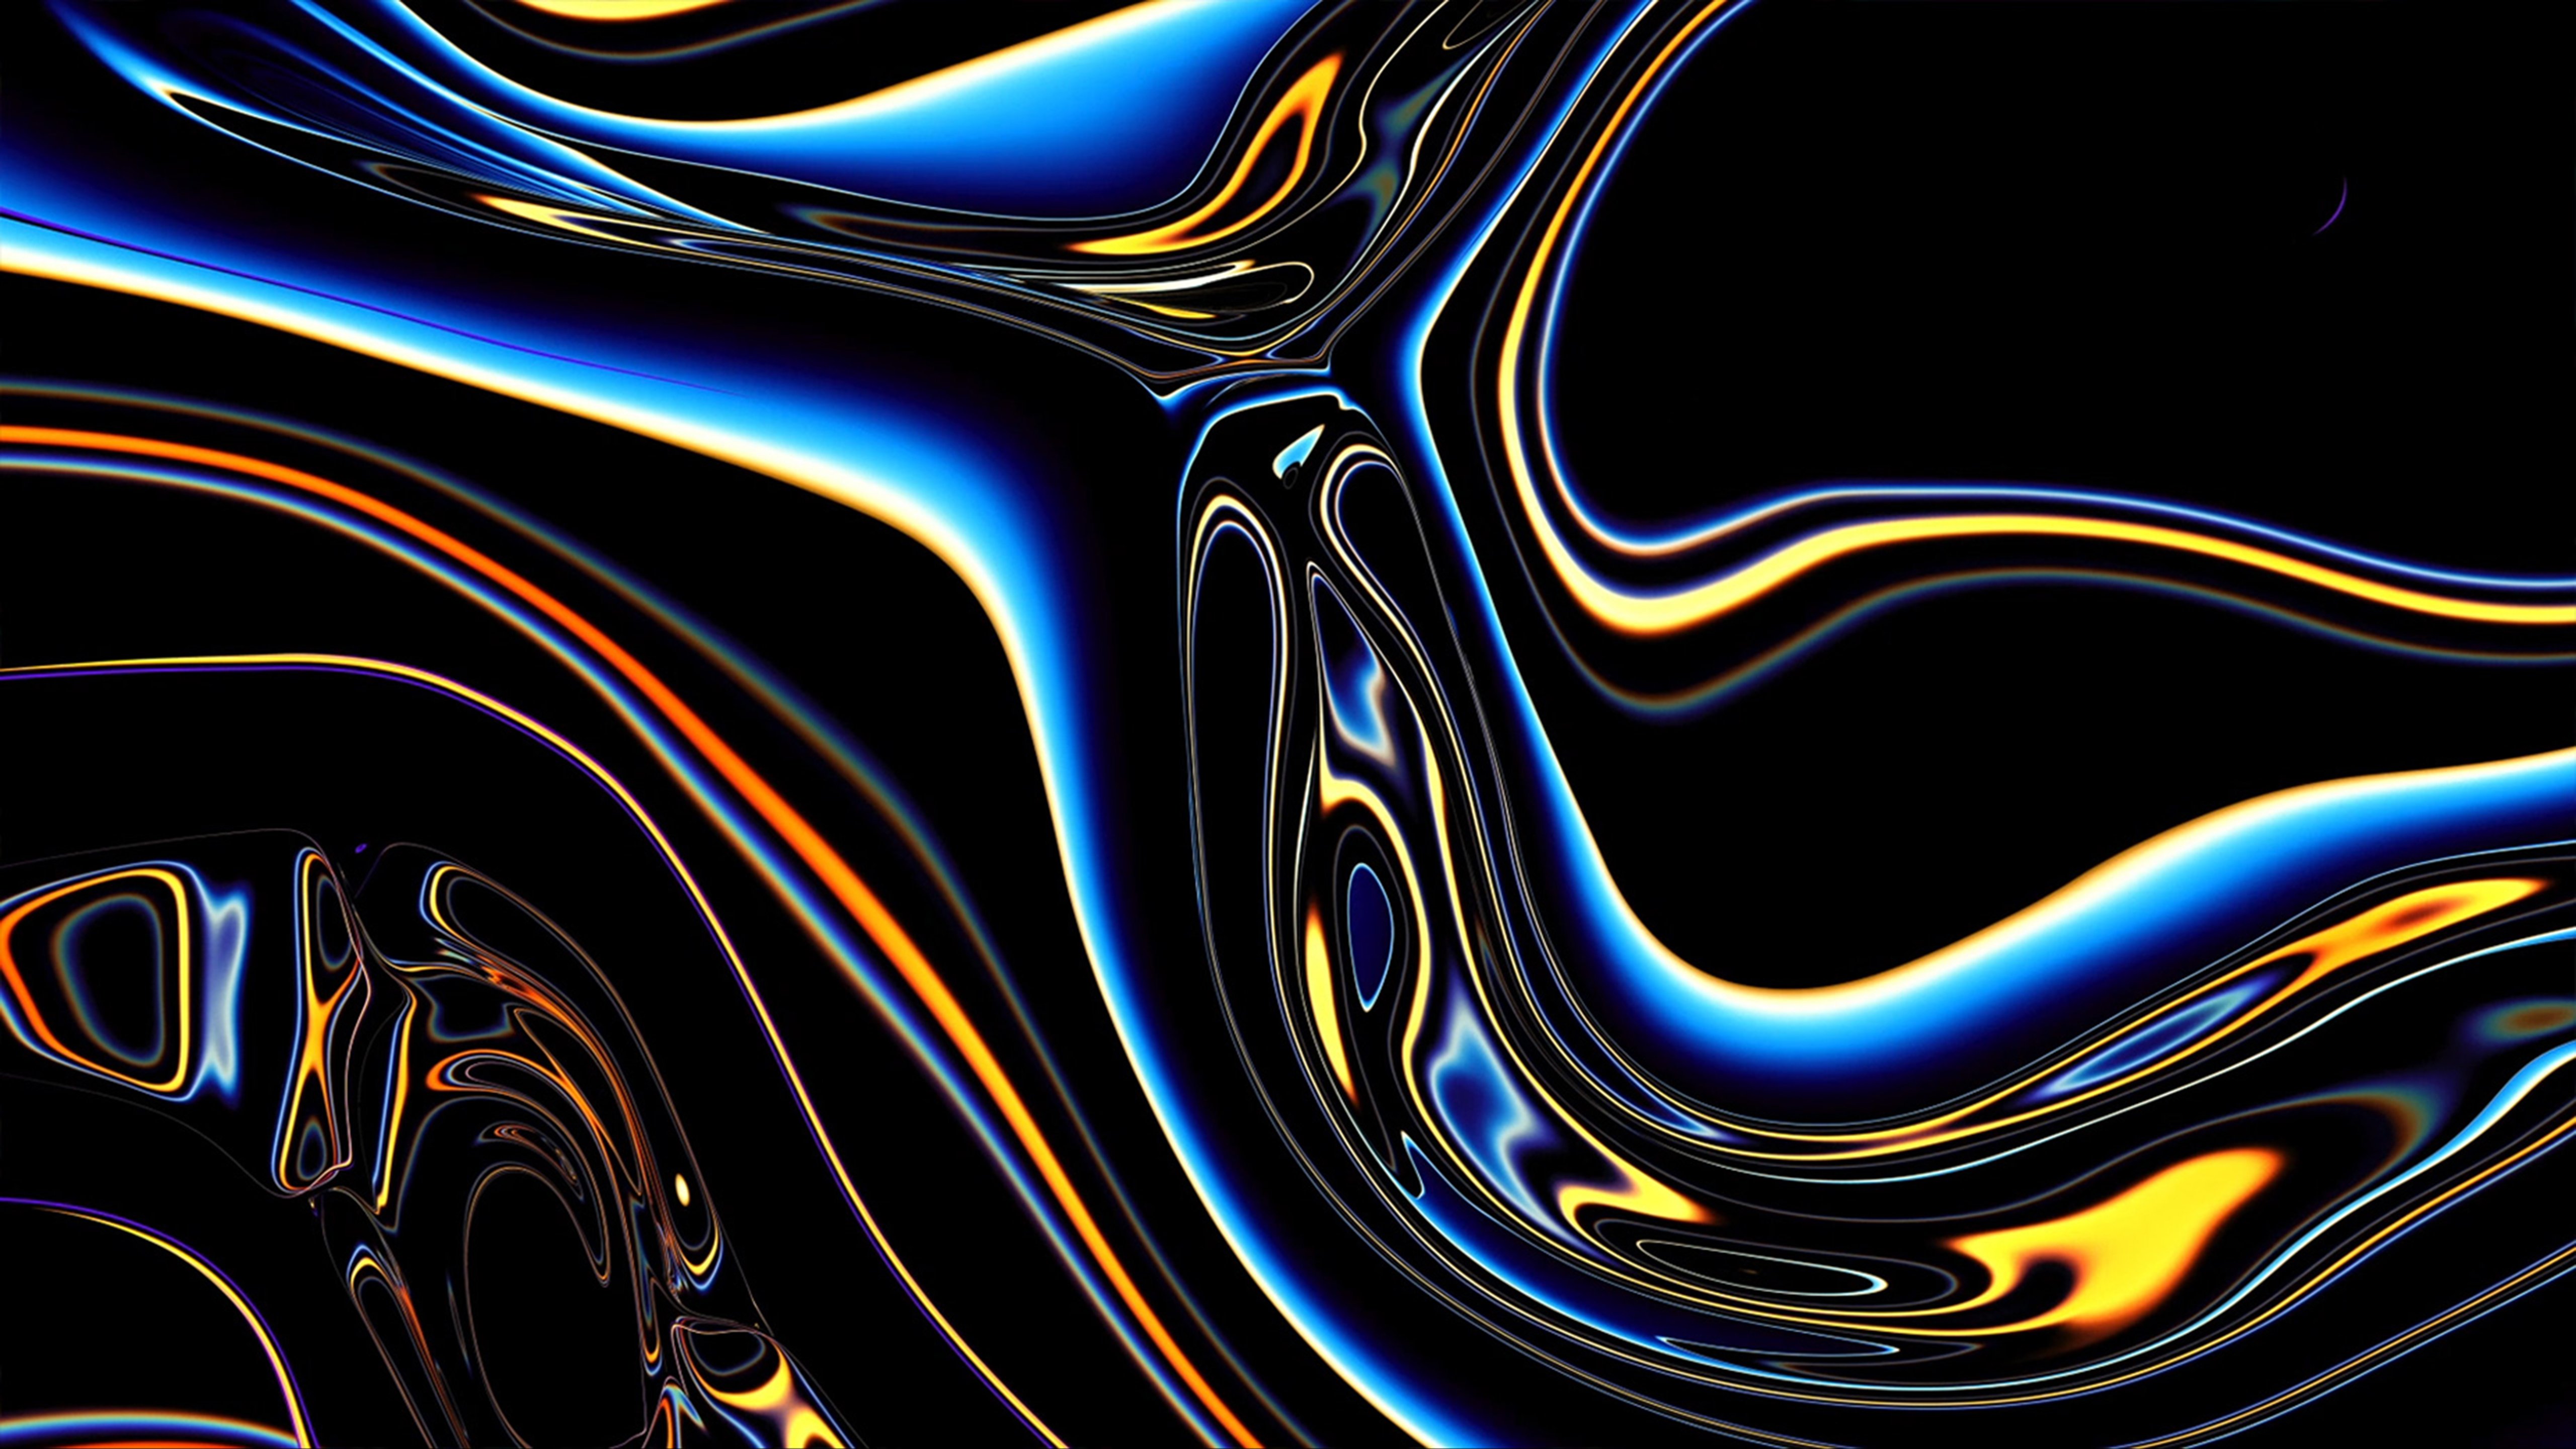 Wallpaper Apple Pro Display XDR Abstract